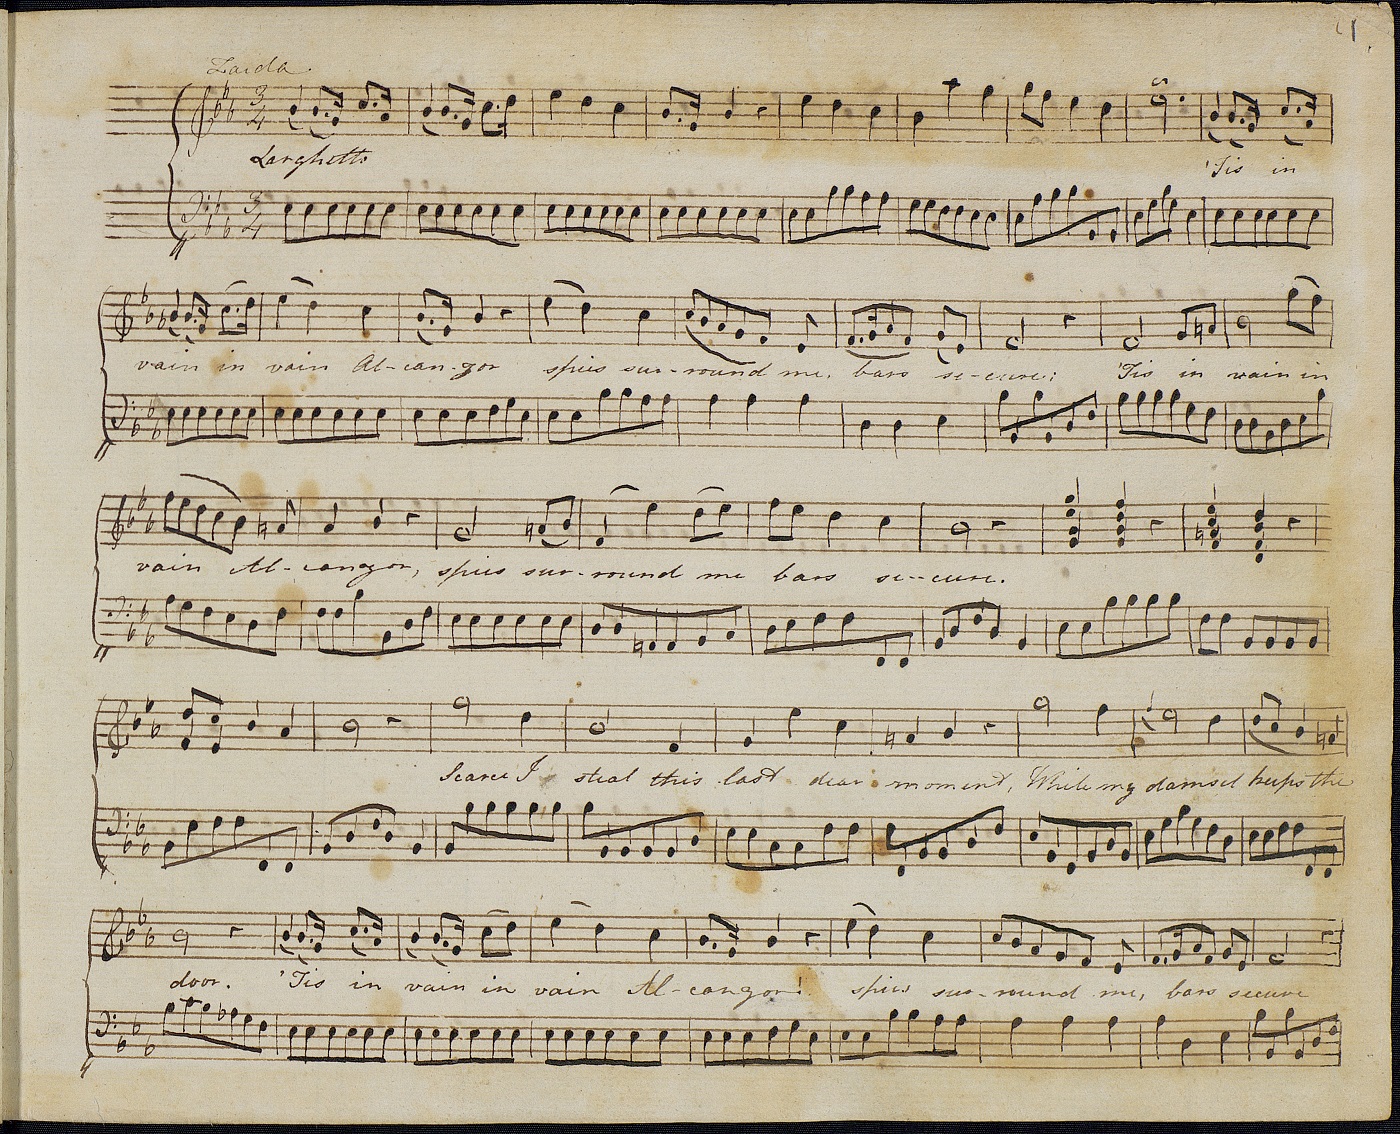 A page of sheet music in Jane Austen's hand